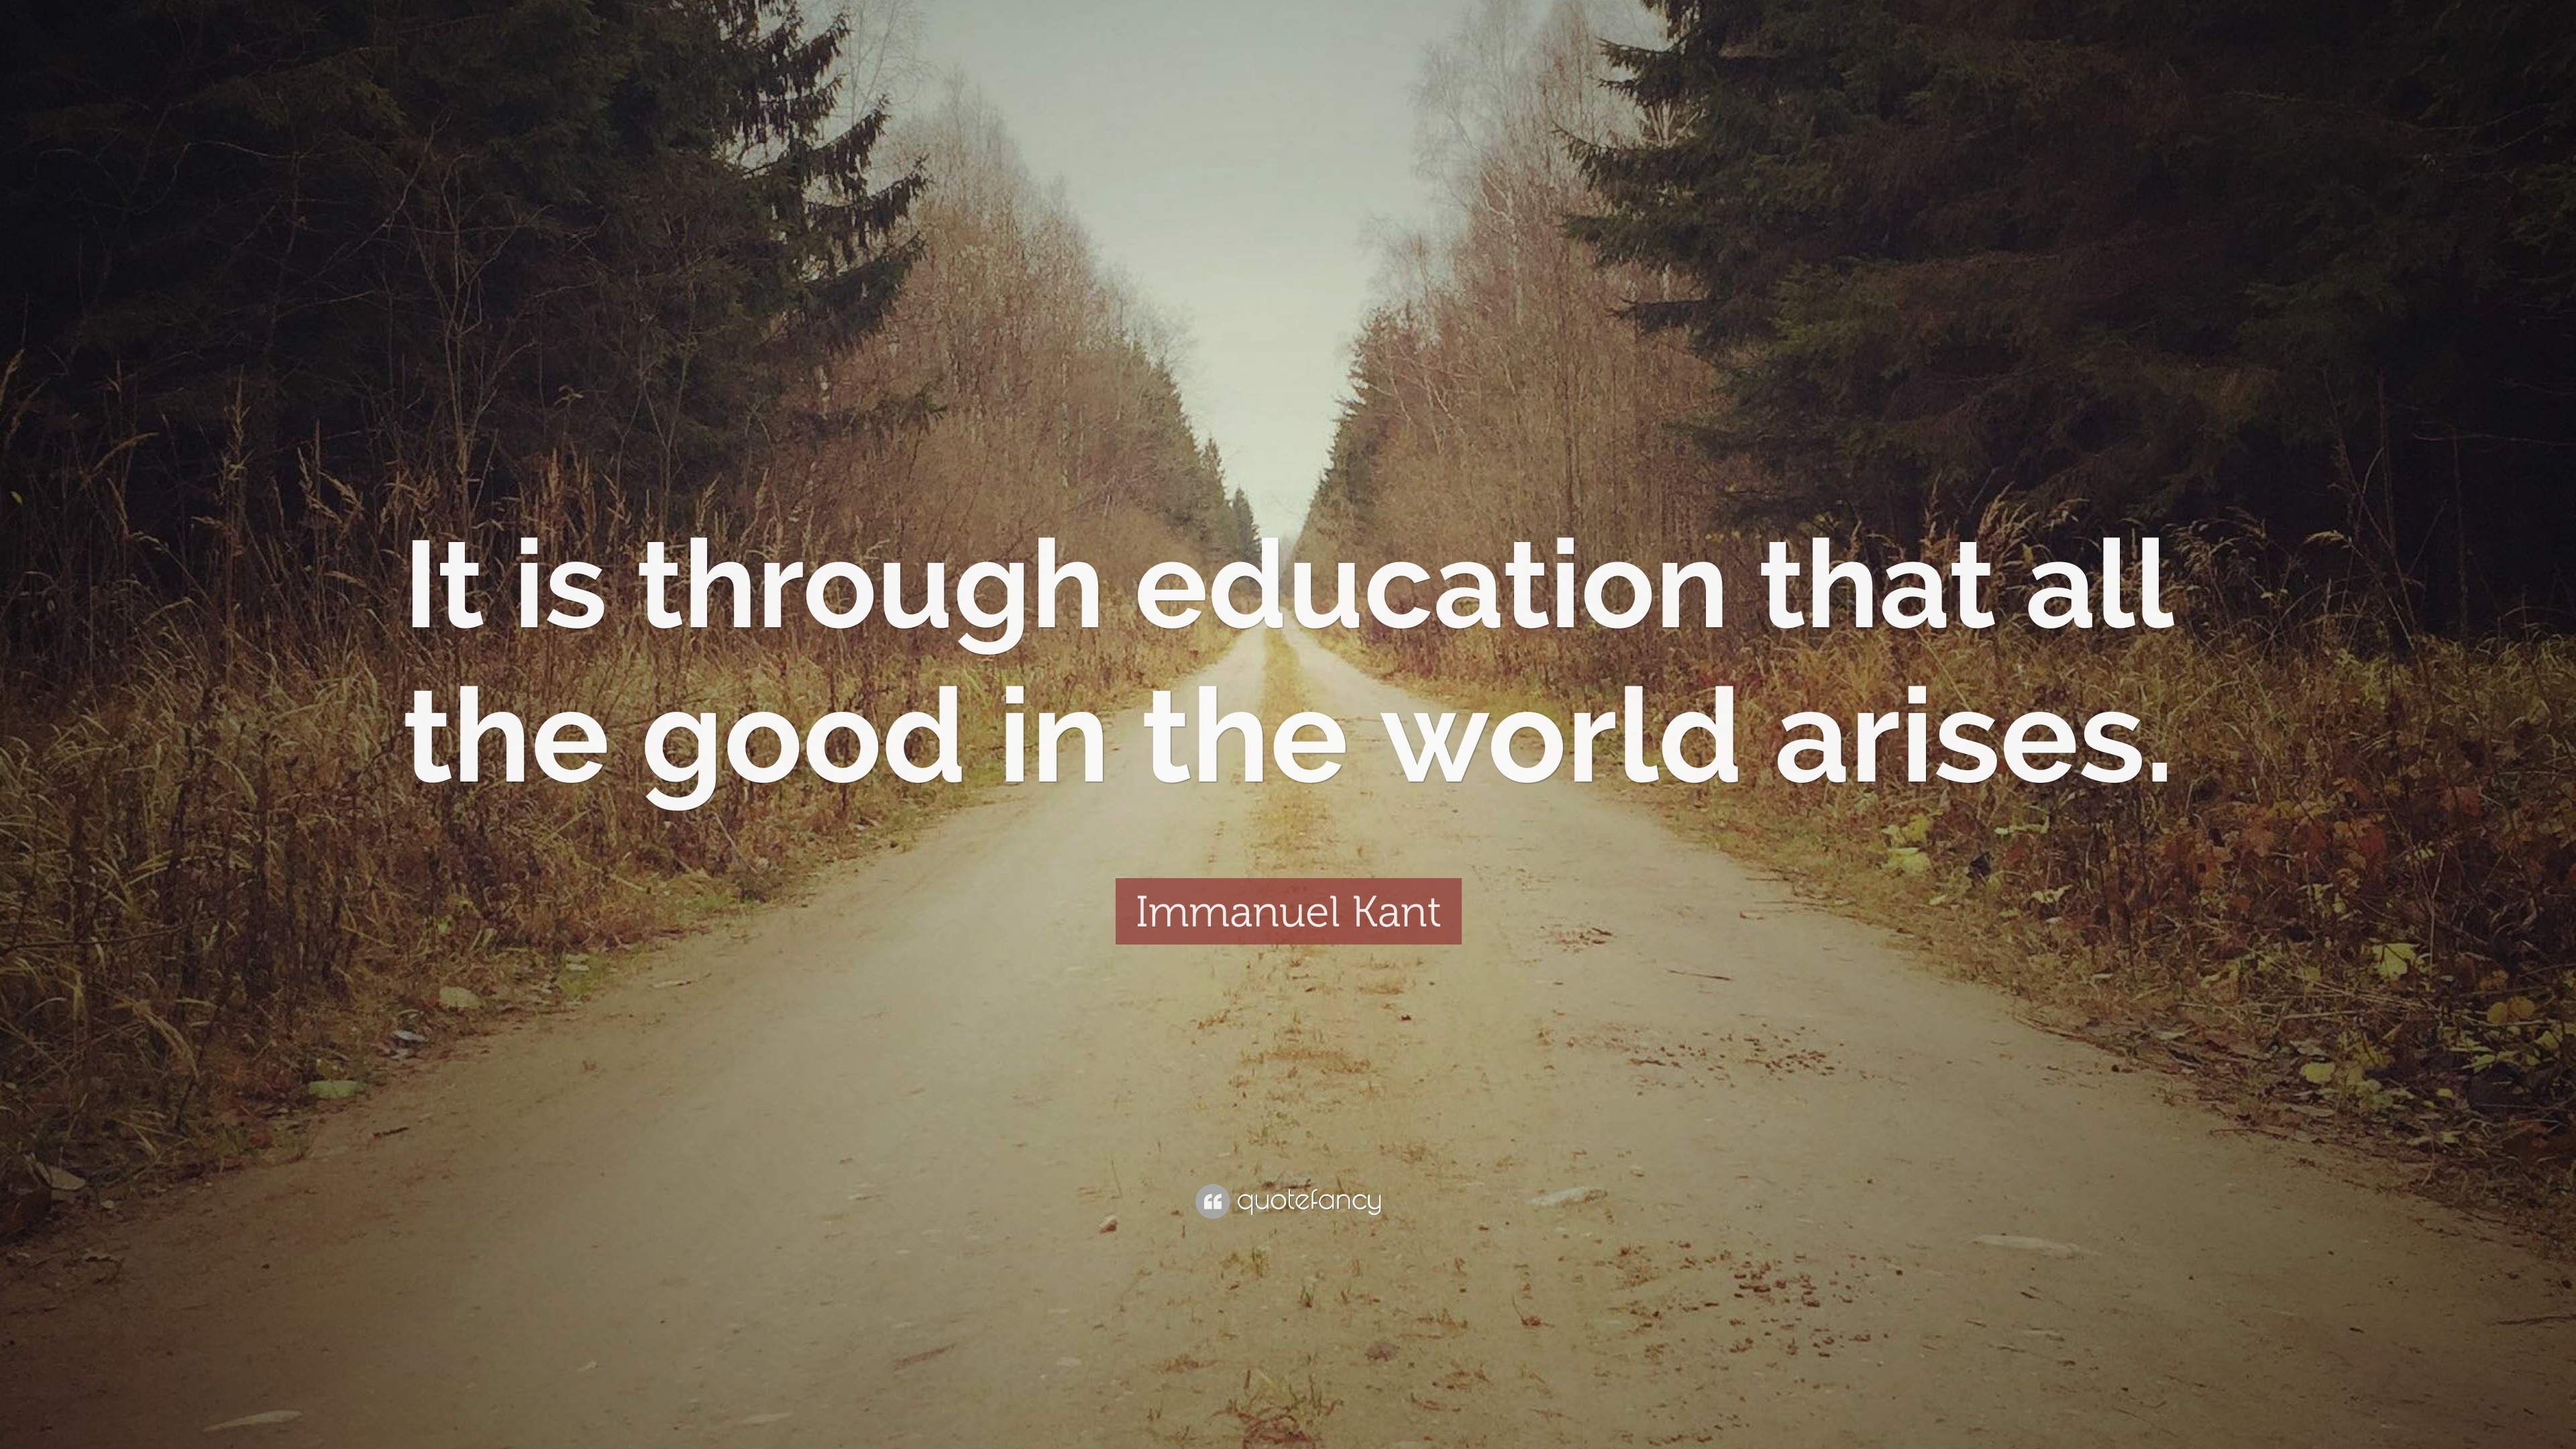 63813 Immanuel Kant Quote It is through education that all the good in